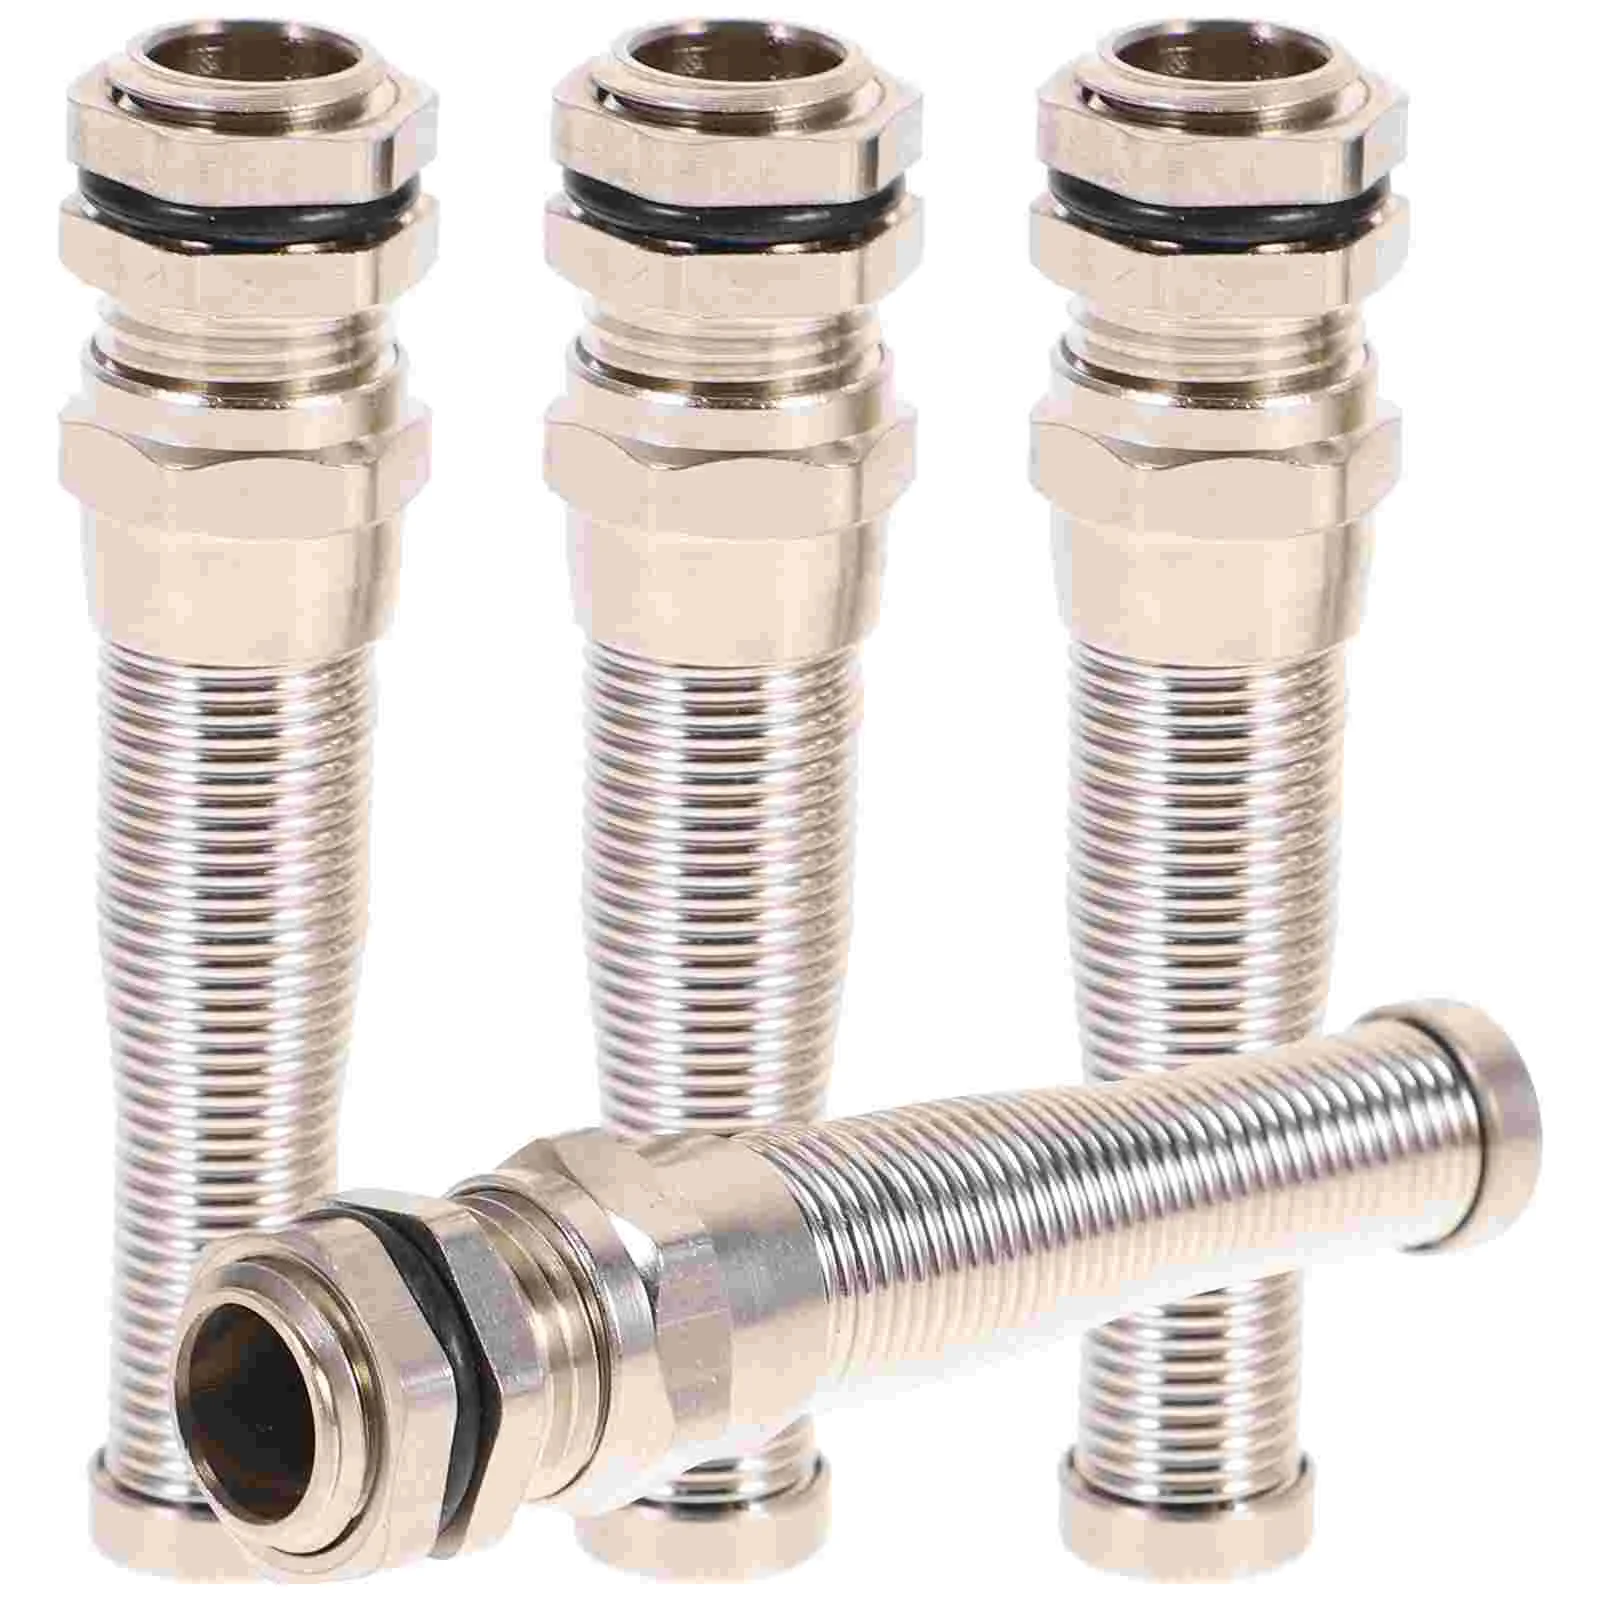 

4 Pcs Cable Gland Waterproof Strain Gauges Metal Cable Waterproof Sleeve Cord Connector Gland Suite Pass Through Brass